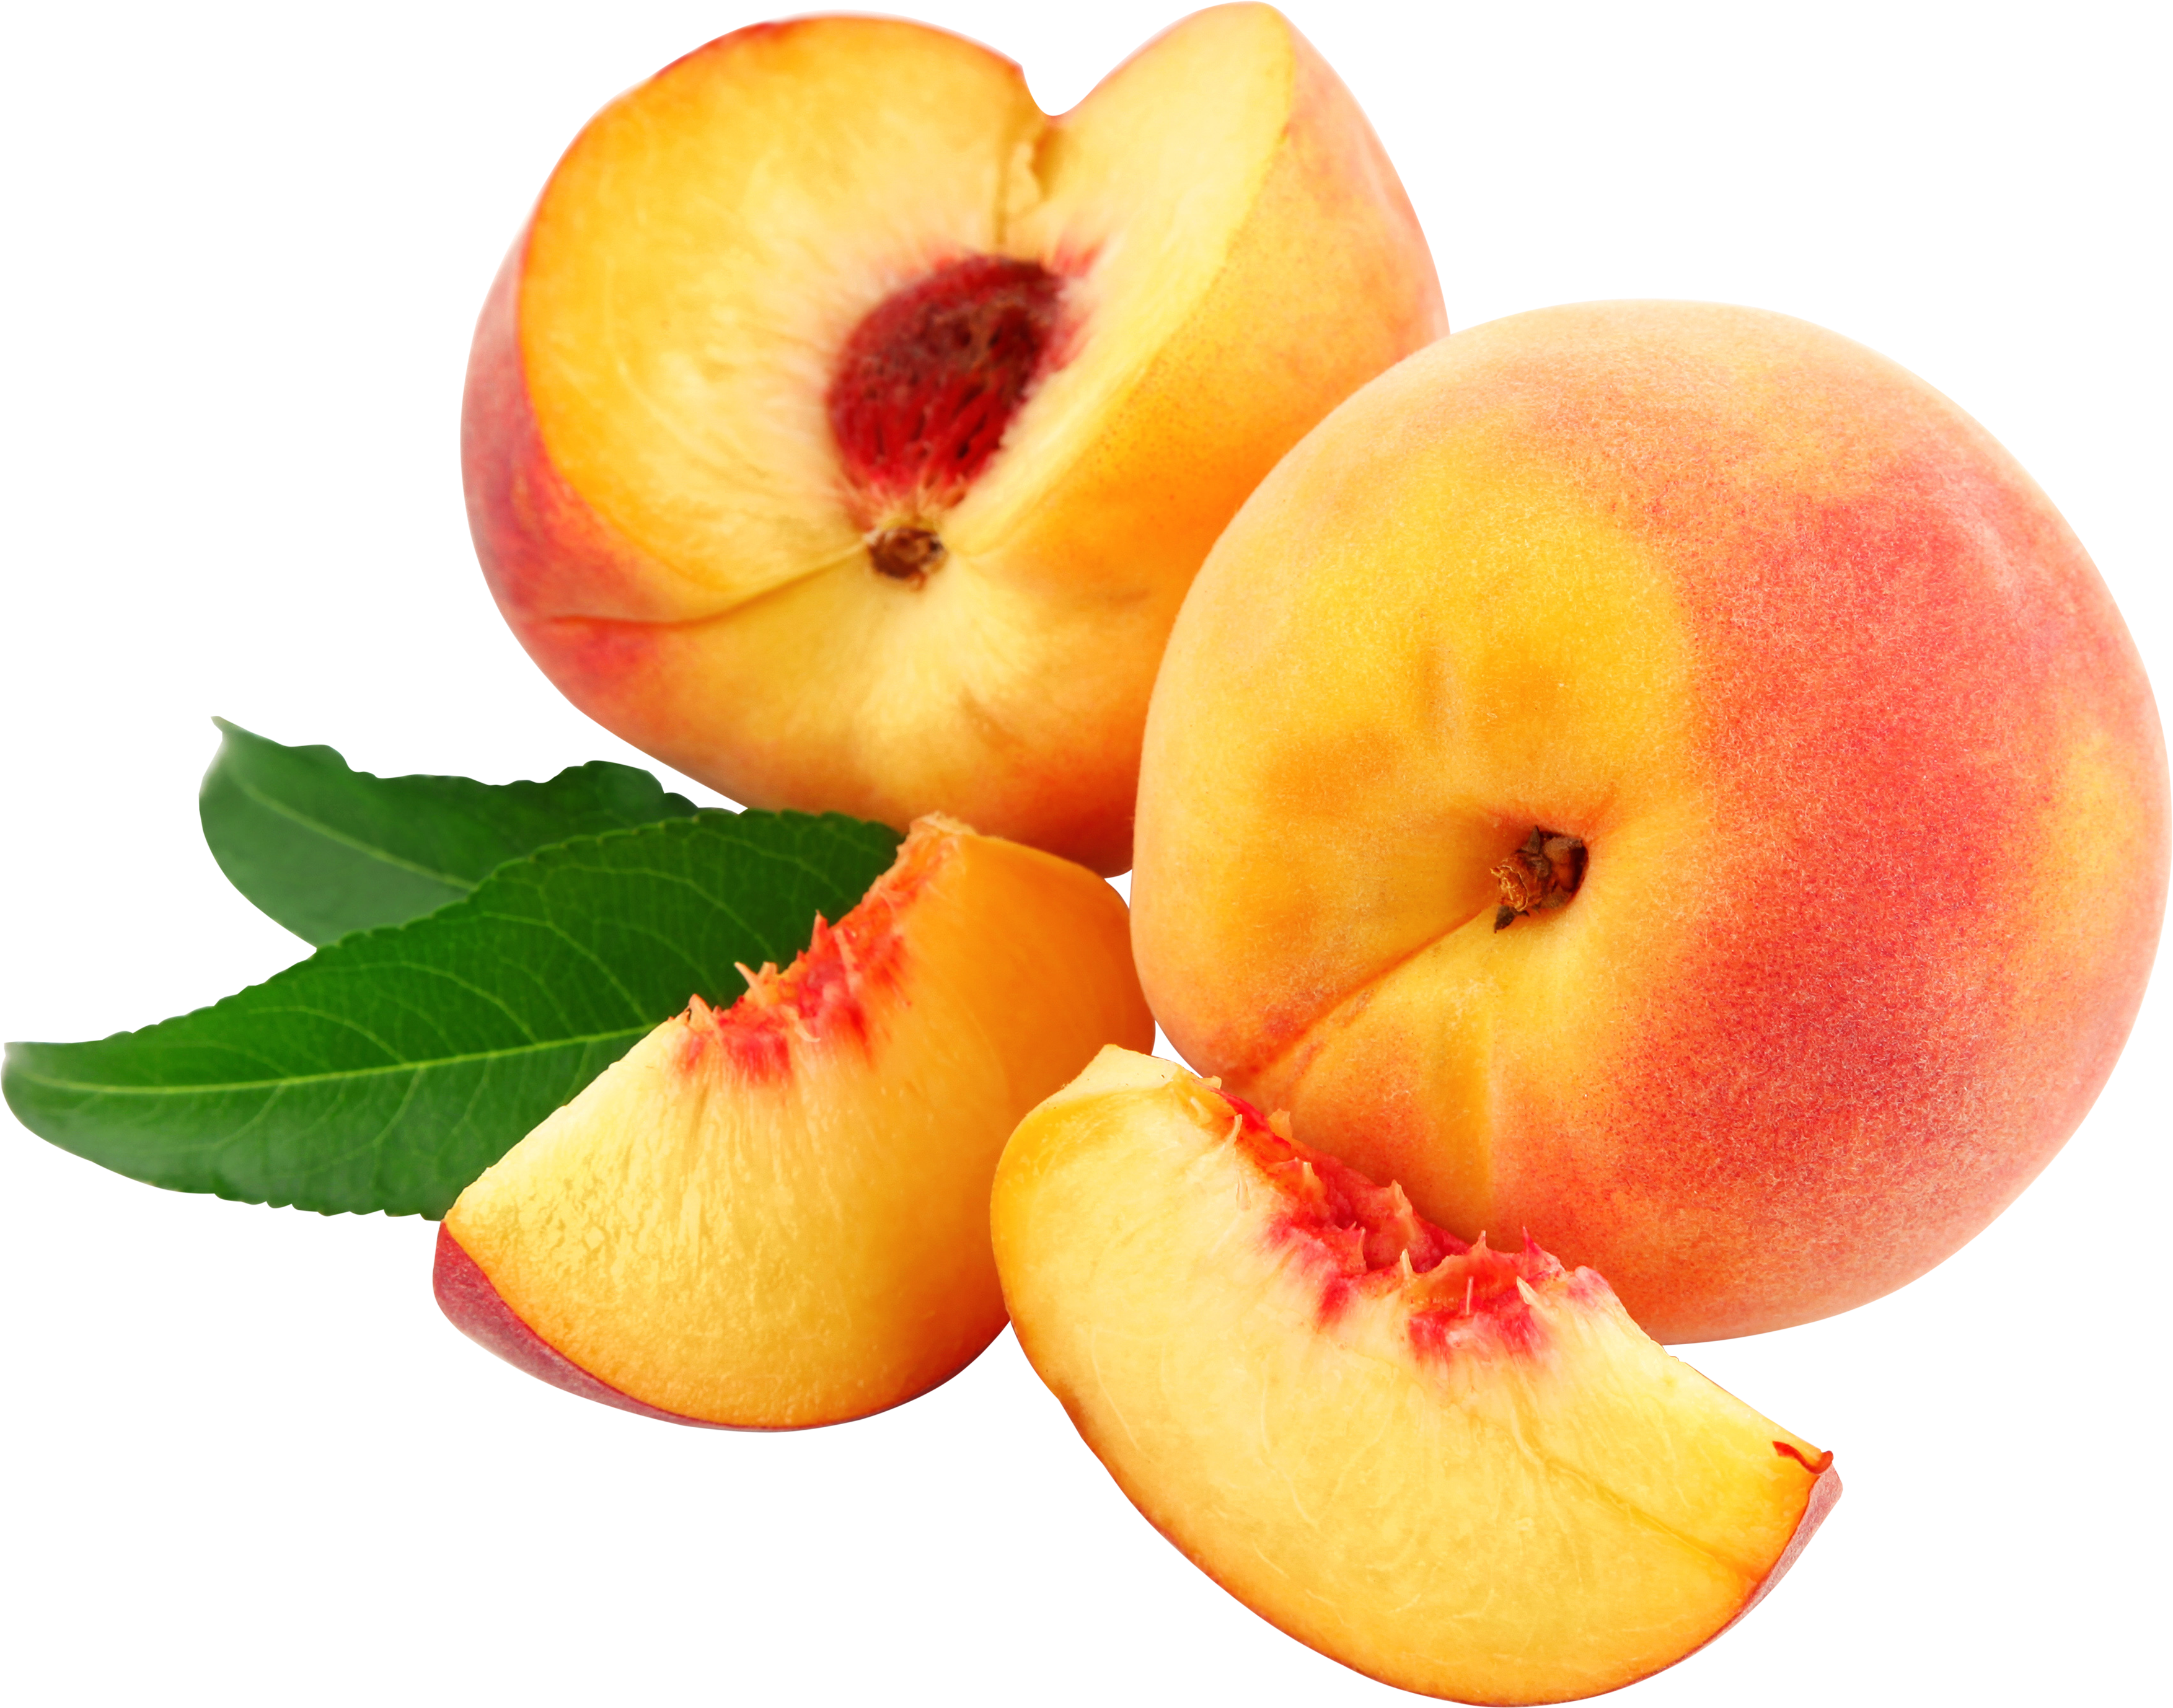 sliced peaches PNG image